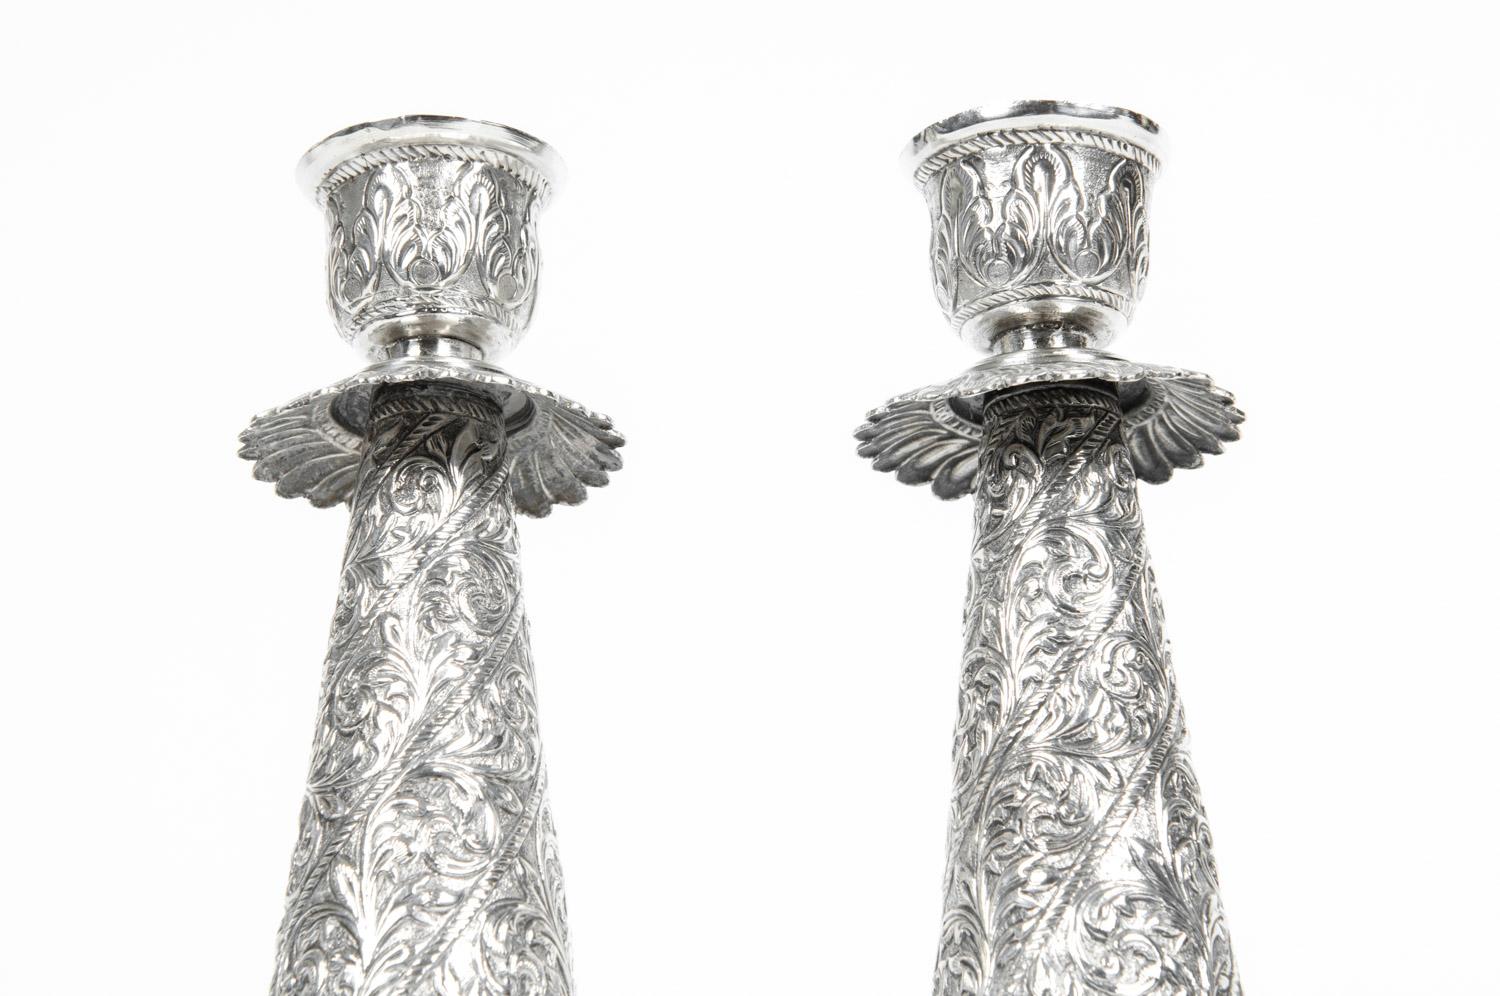 Antique sterling silver pair candlestick with exterior design details. Each candle stick is in excellent antique condition. Each one measure about 9.7 inches high x 3 inches base diameter.